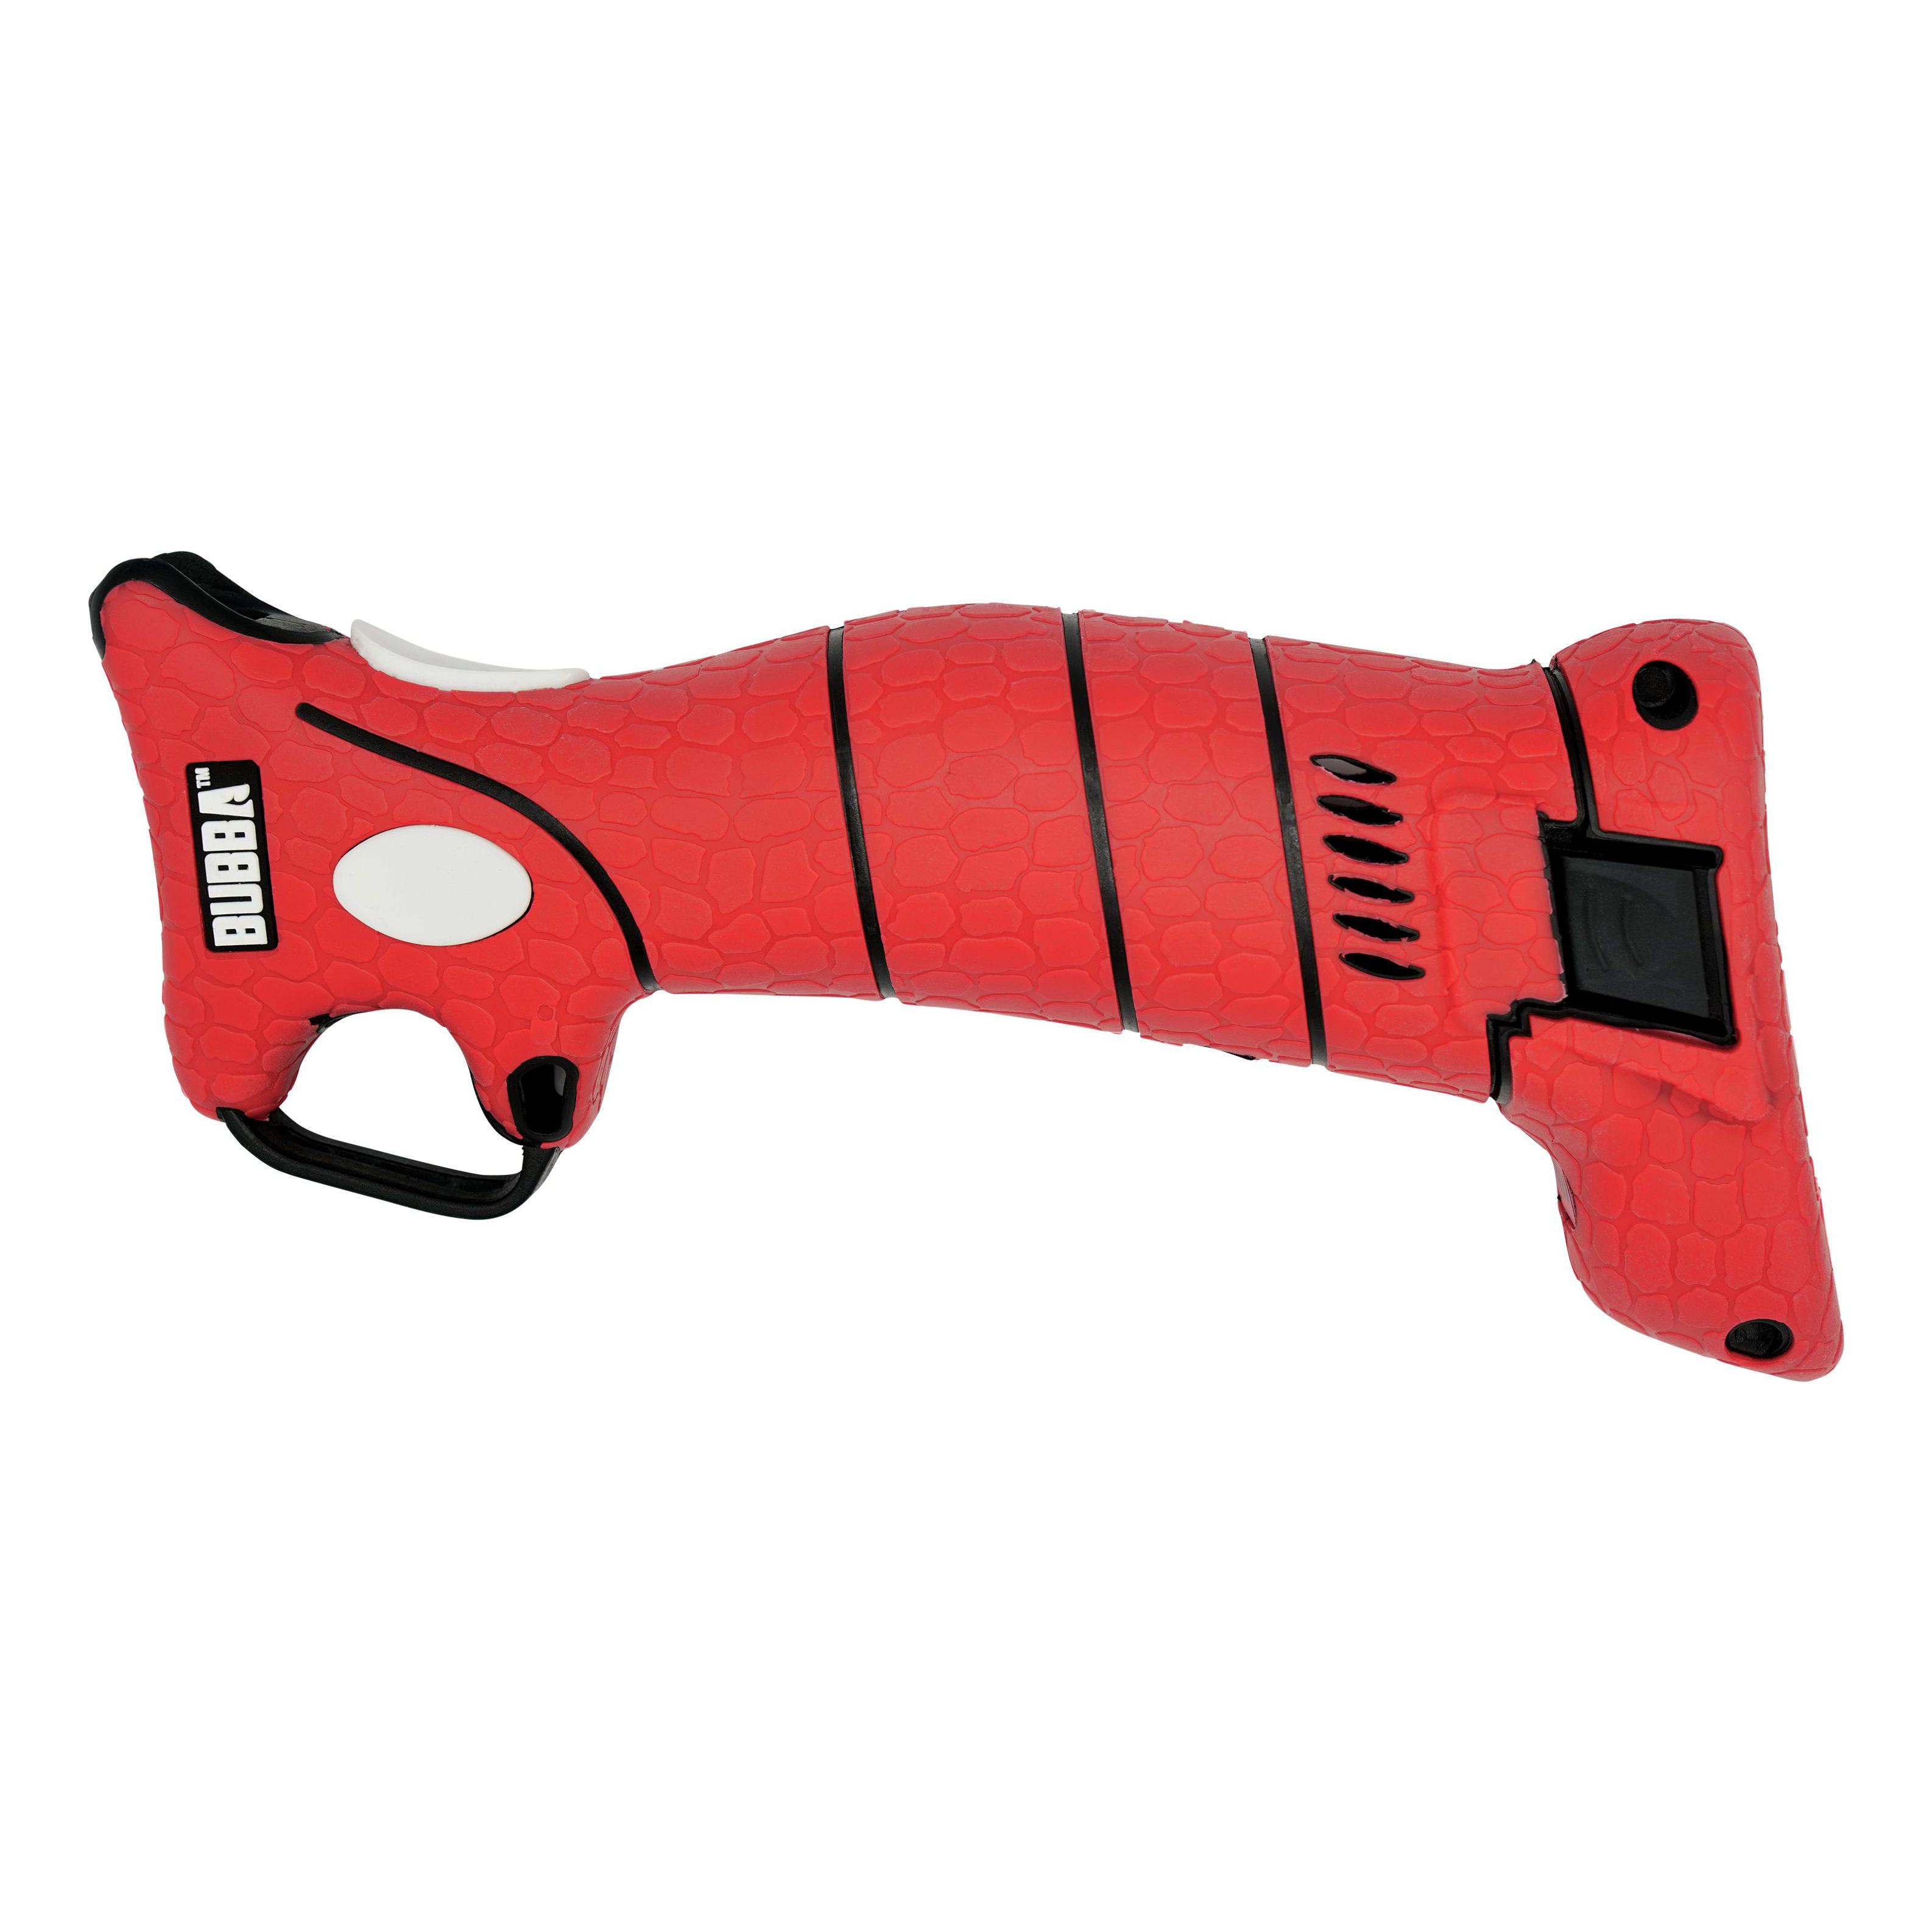 Bubba® Lithium-Ion Cordless Fillet Knife - Handle View